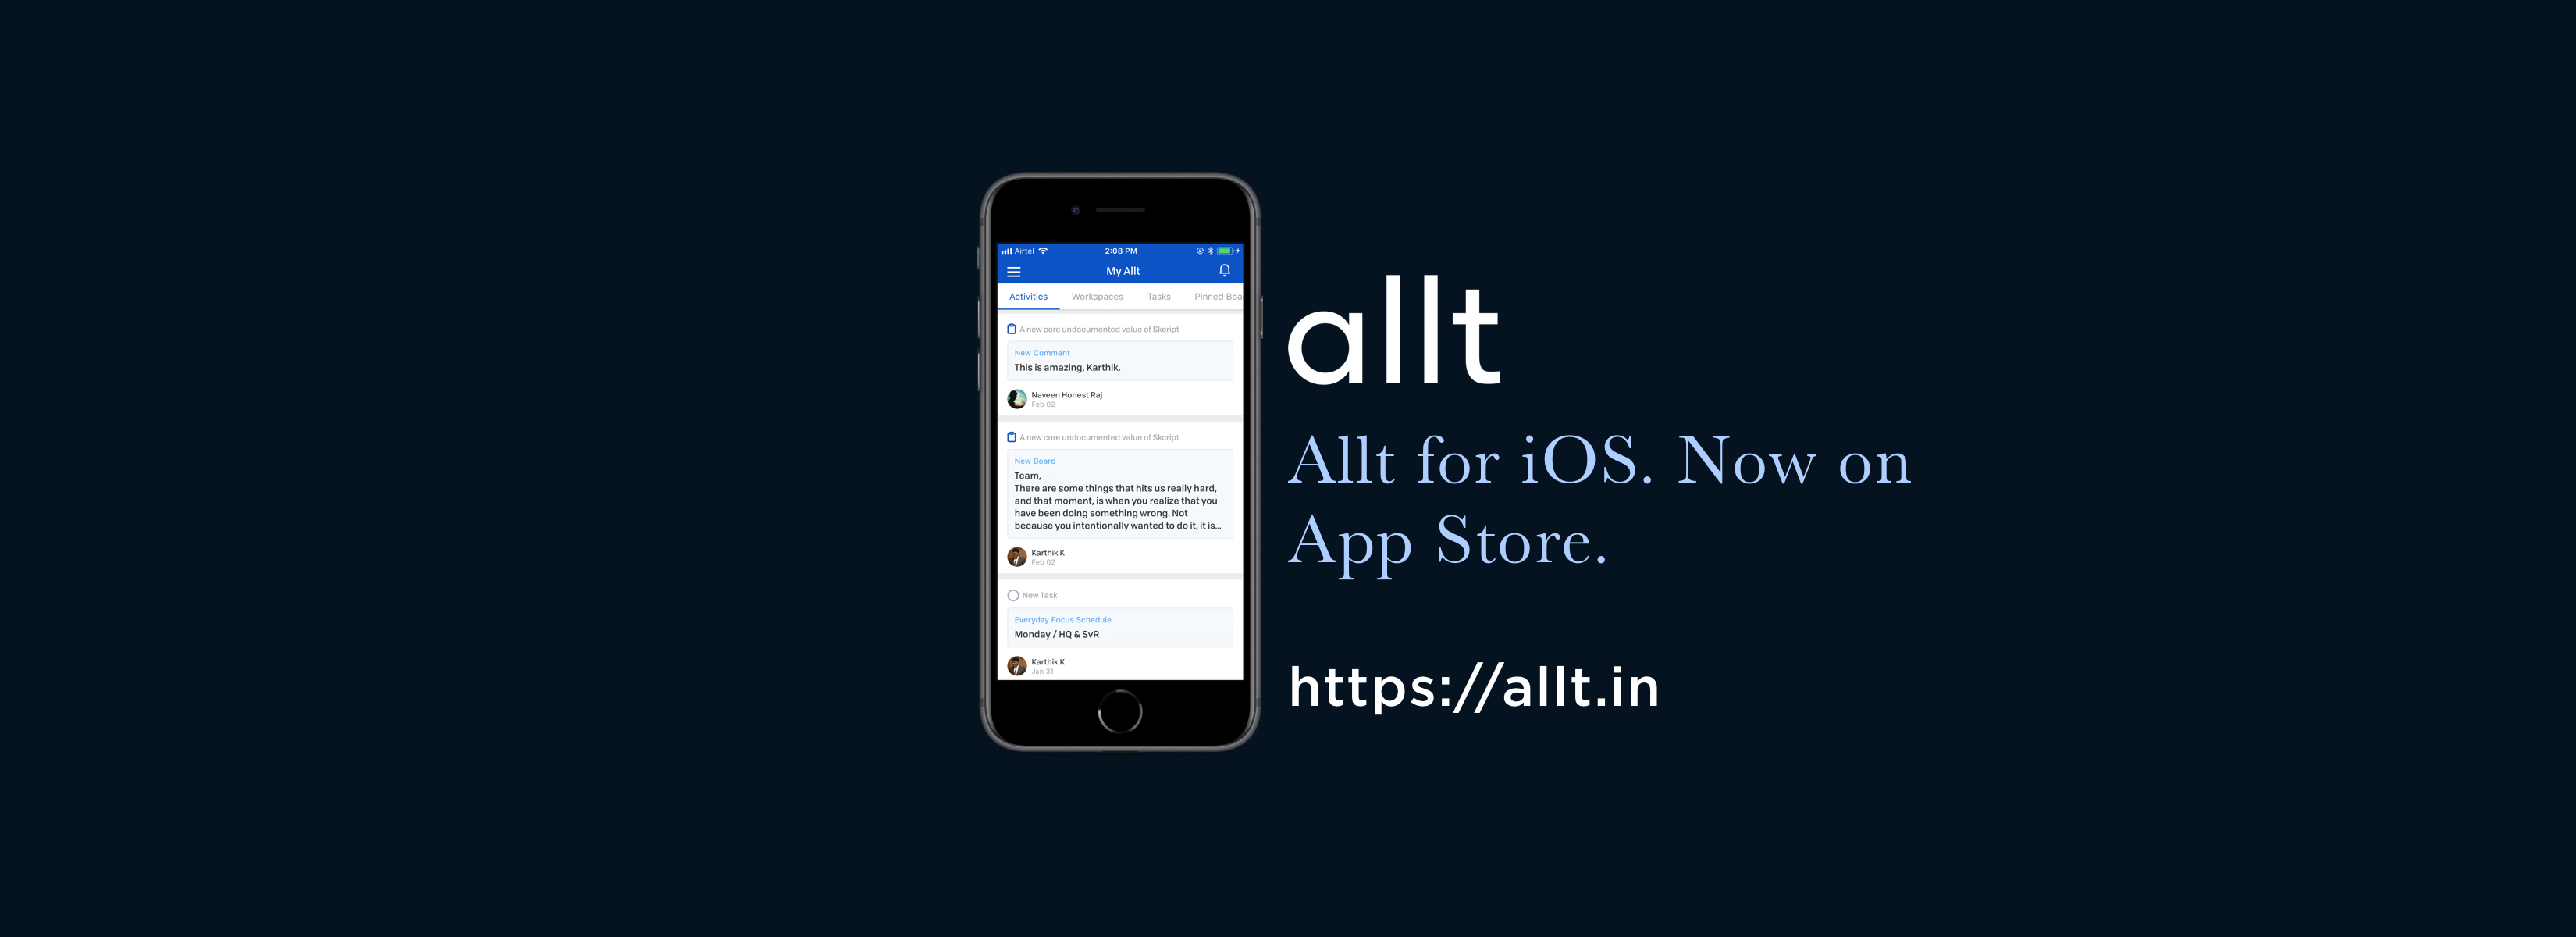 Announcing Allt for iOS. But there's a catch.